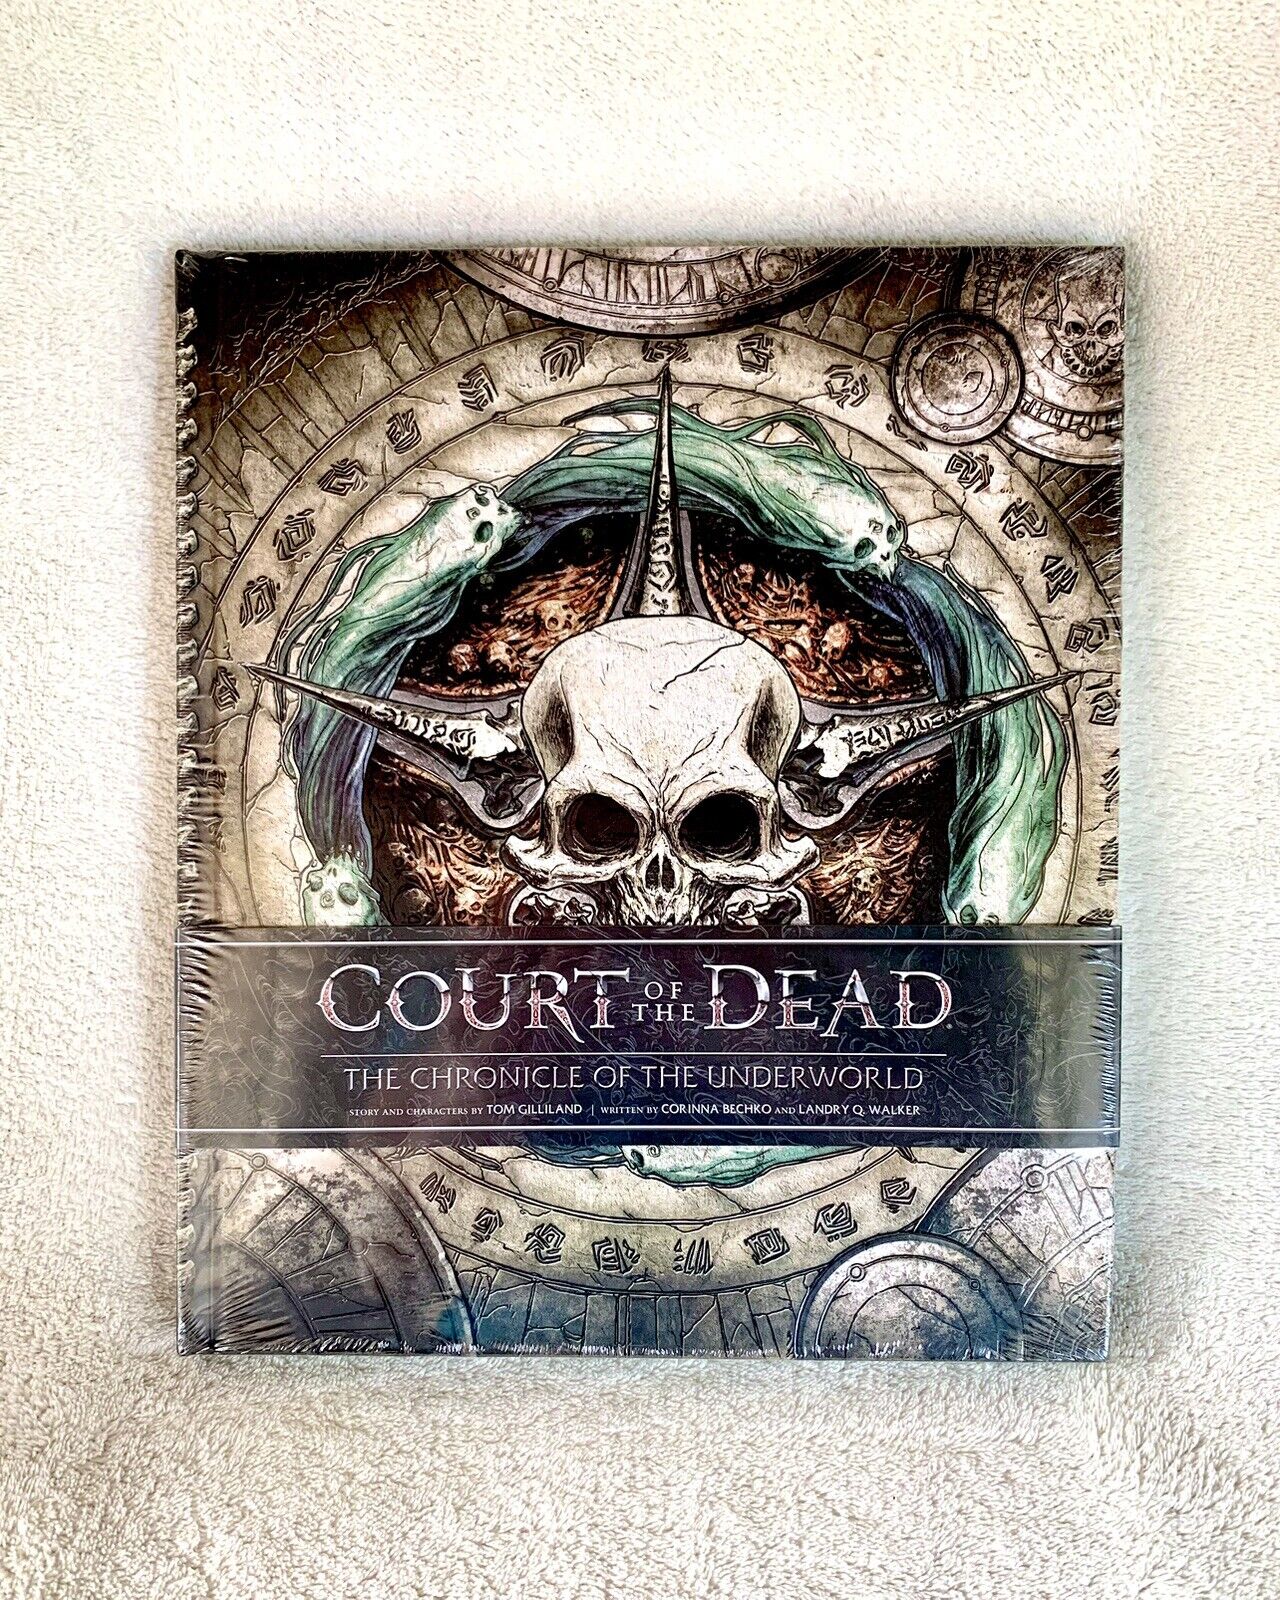 NFS Court of the Dead The Chronicle of the Underworld by Tom Gilliland 2016 HC